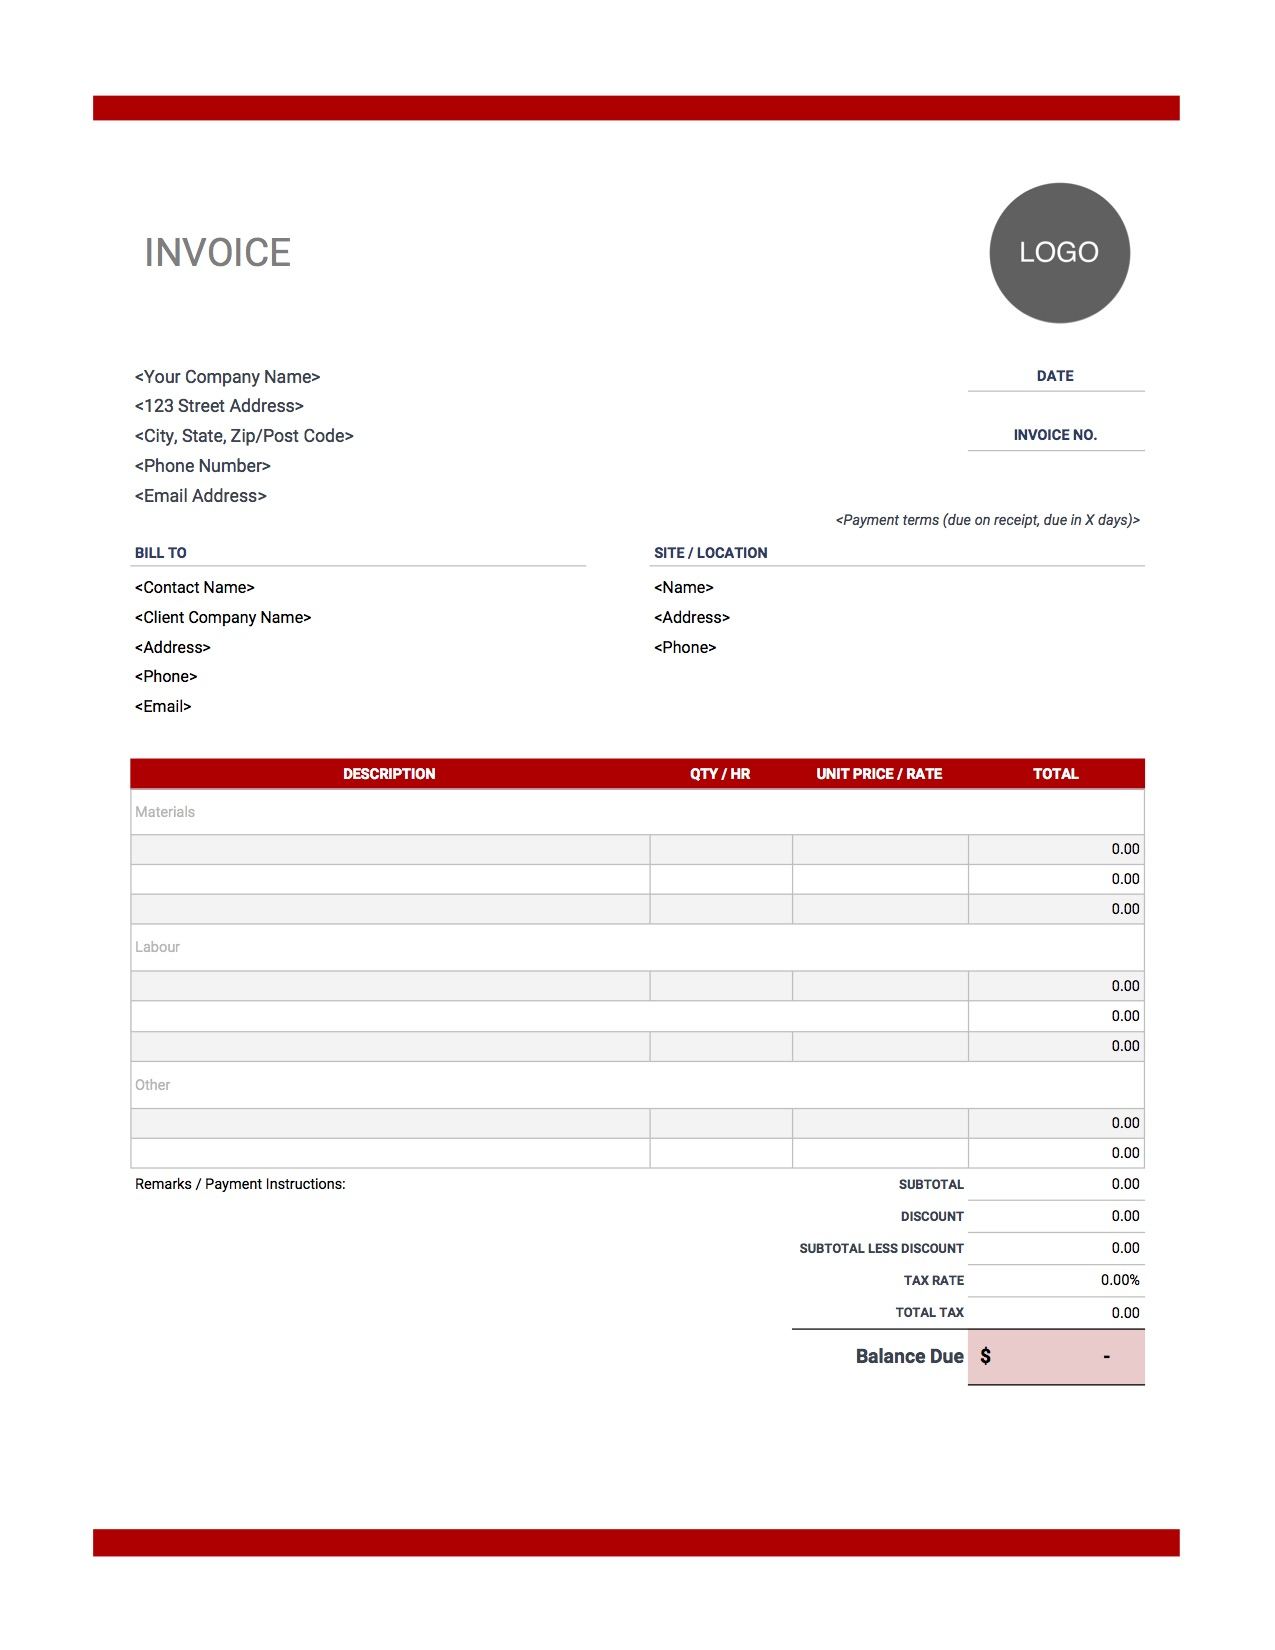 Invoice Template For Construction Work